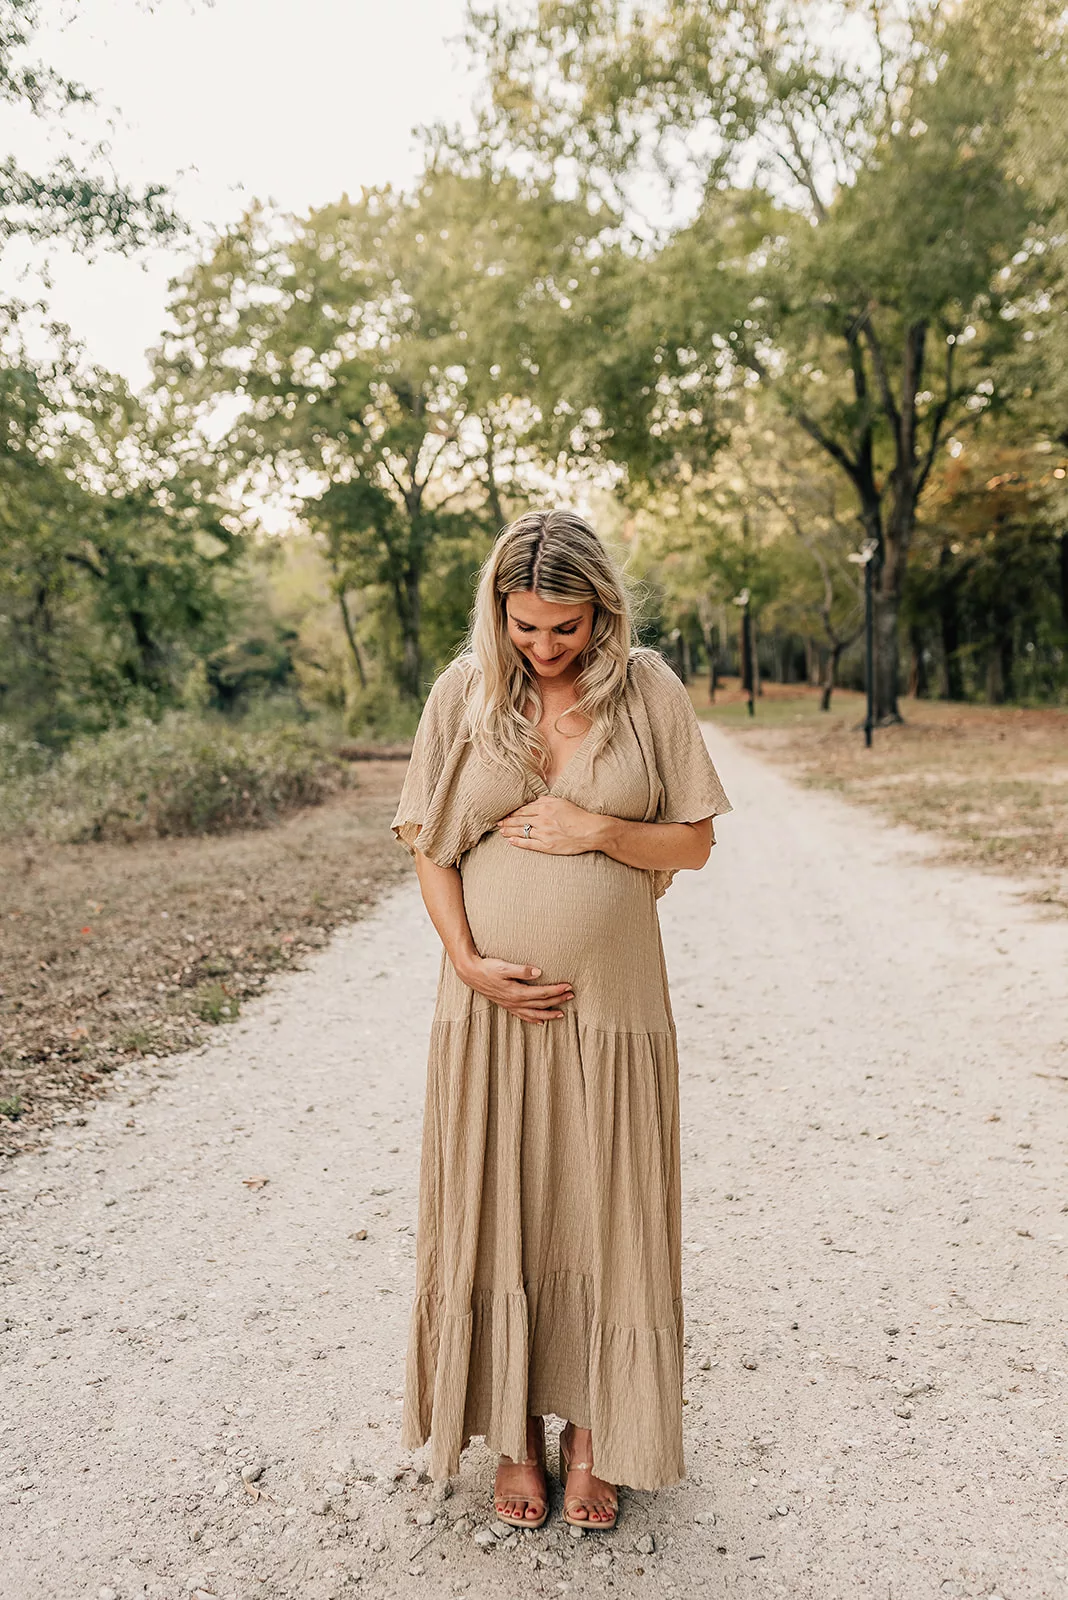 A happy mom to be smiles down at her bump while standing in a gravel park path